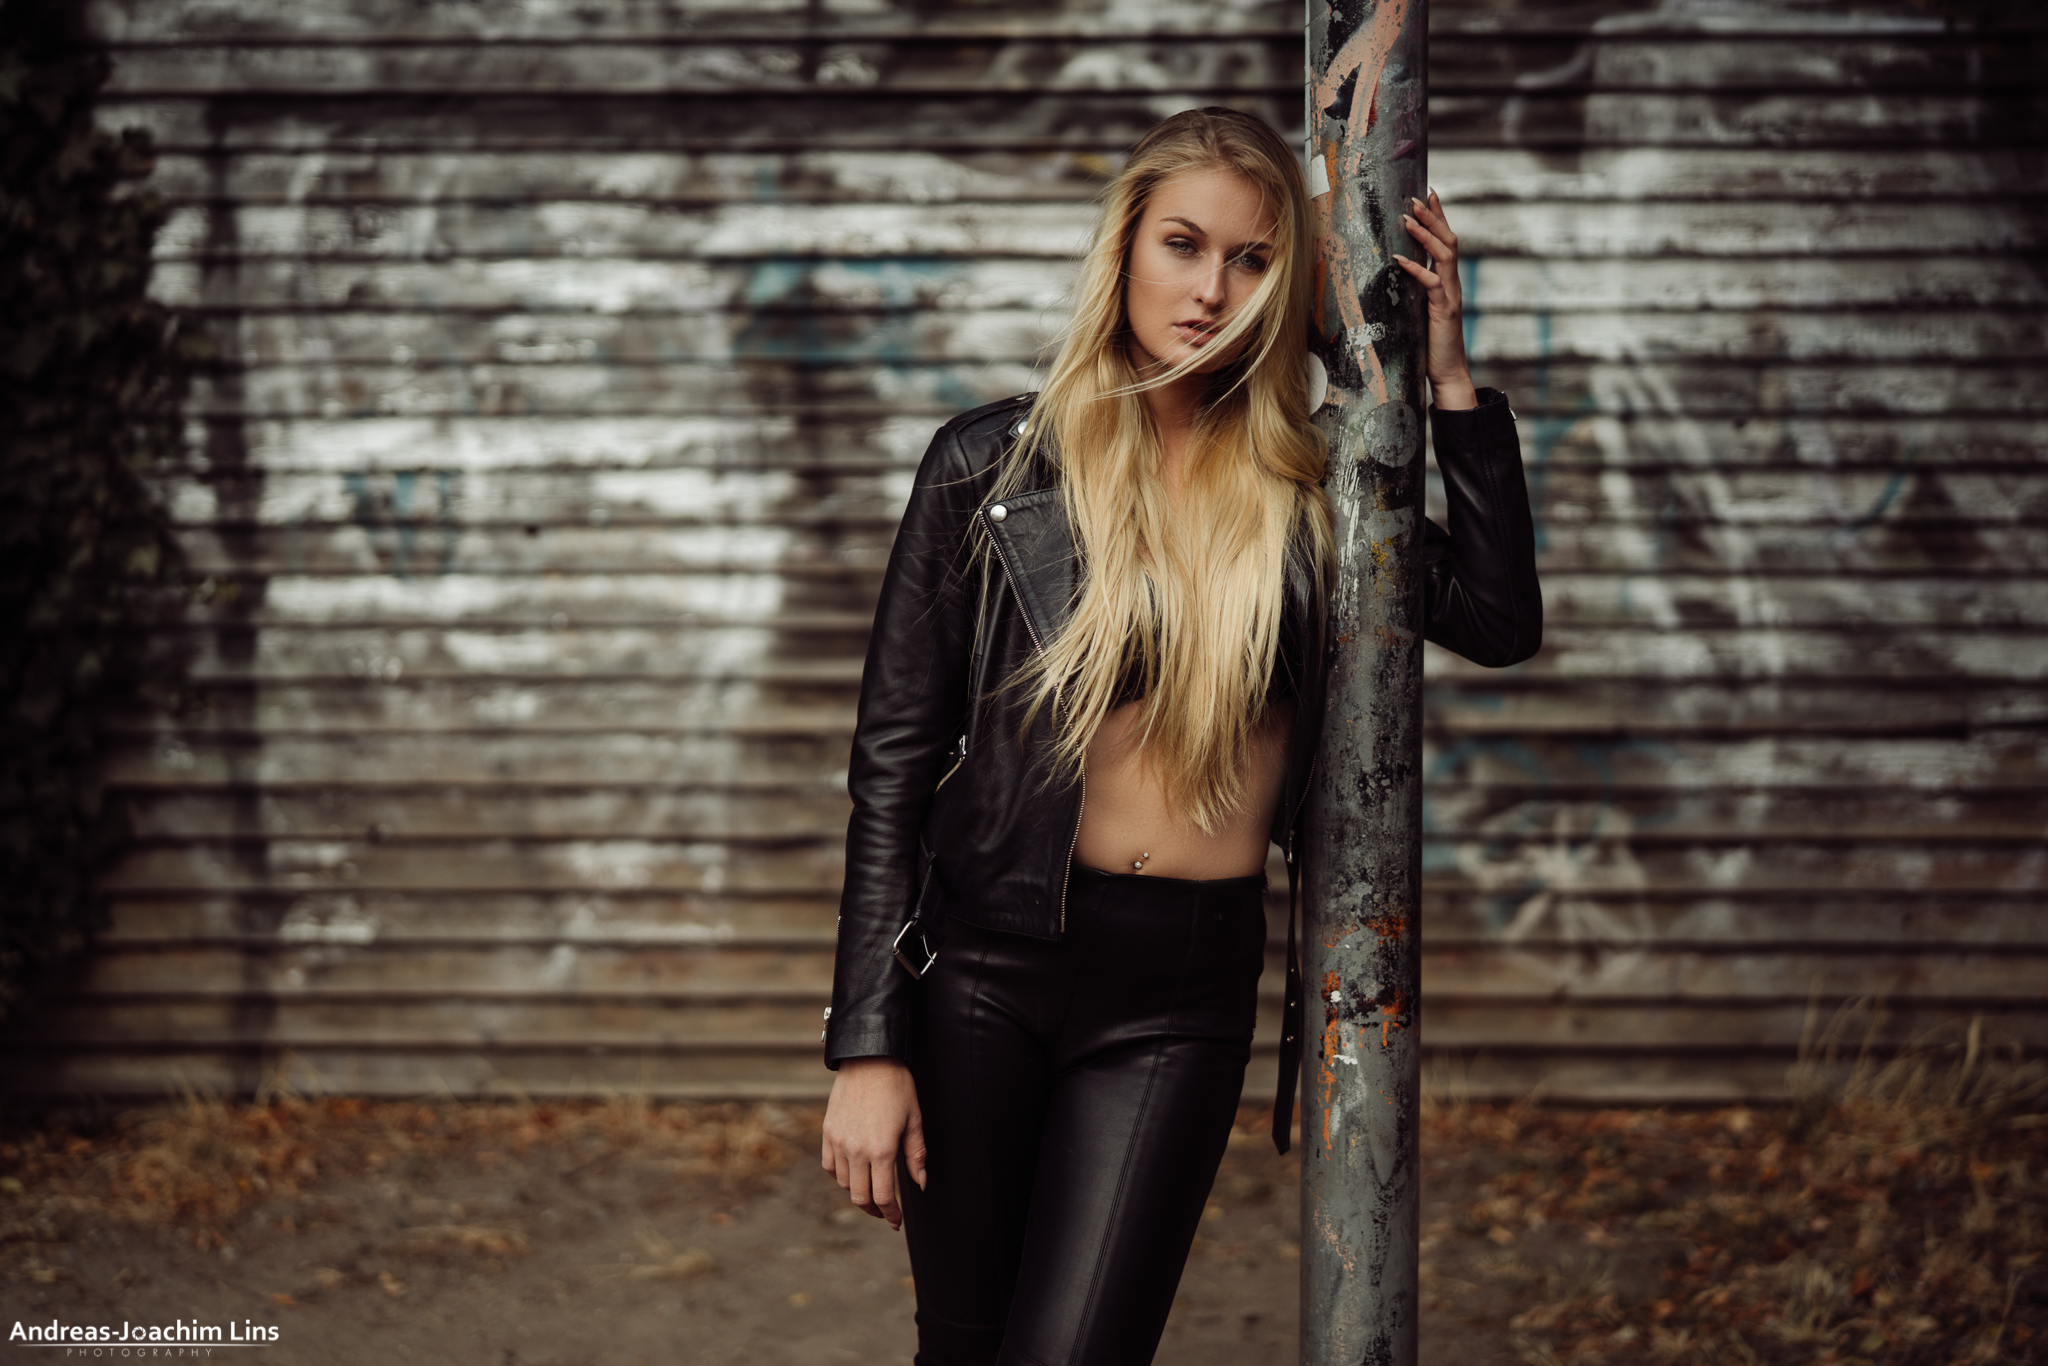 Andreas Joachim Lins Women Model Blonde Looking At Viewer Leather Jackets Leather Pants Portrait Wom 2048x1366